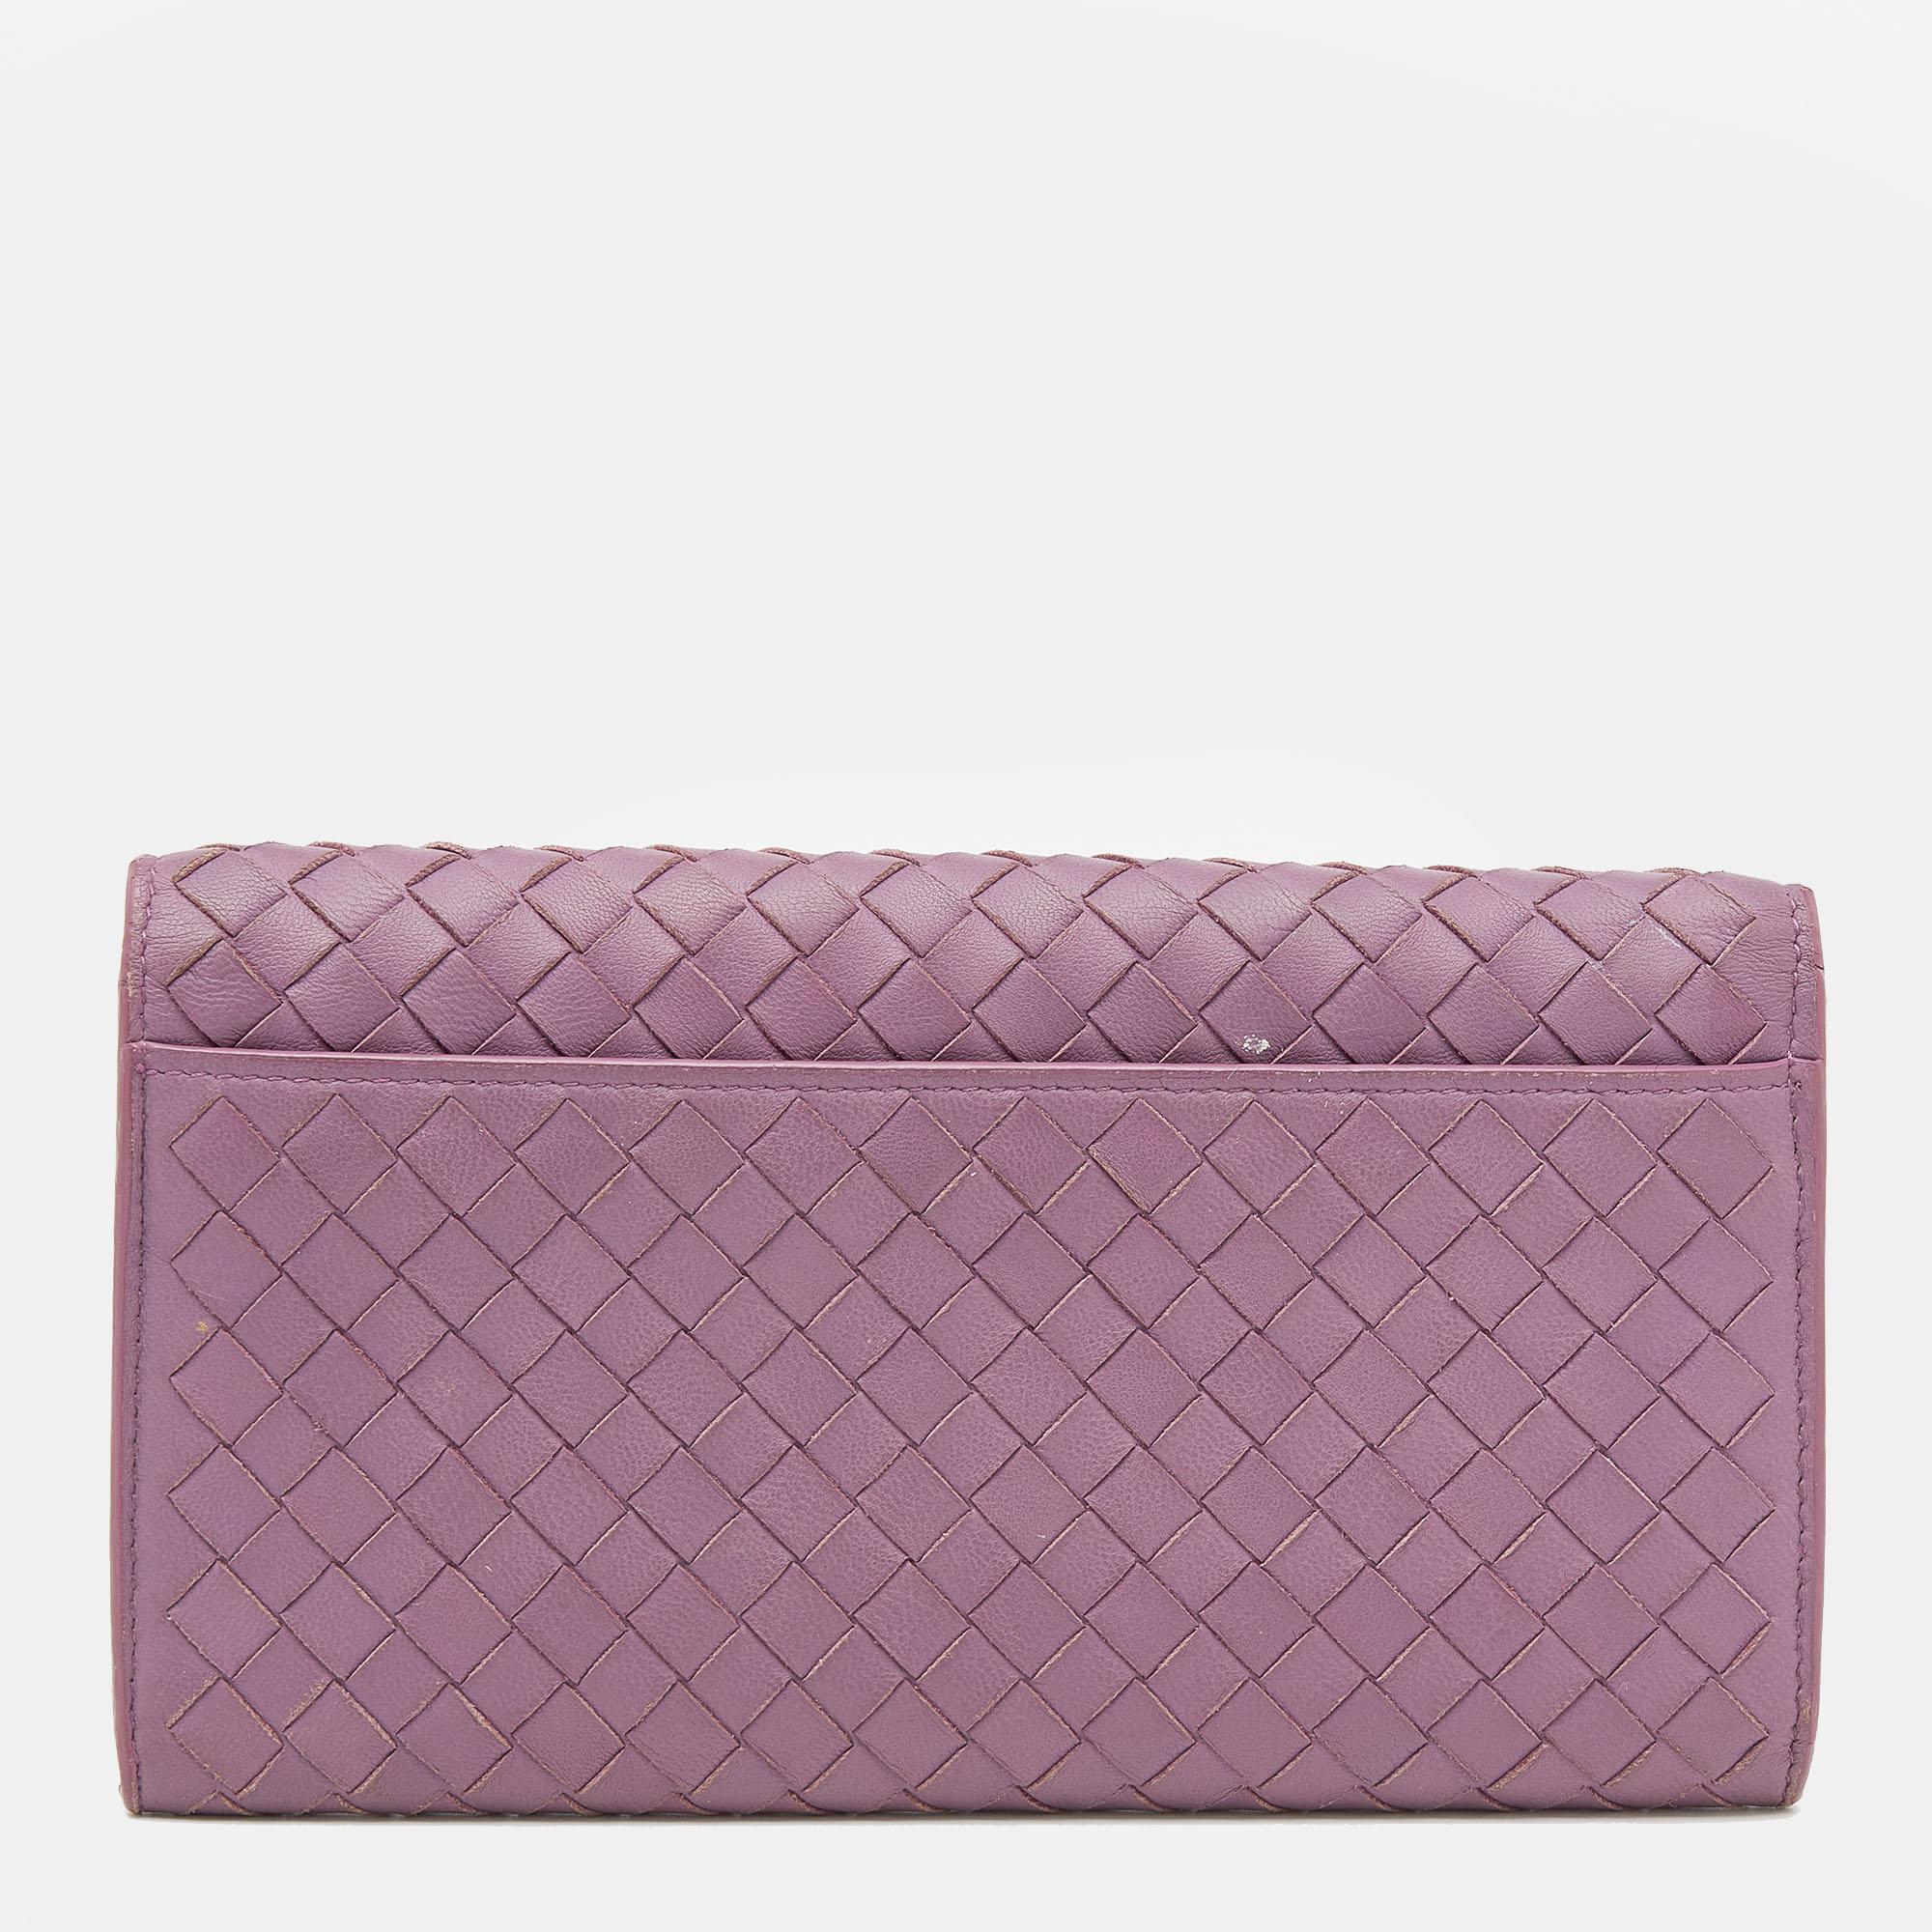 This designer wallet by Bottega Veneta is made in the signature Intrecciato weave. Crafted from leather, this purple wallet is equipped with multiple card slots, cash slots, and a zip compartment.

